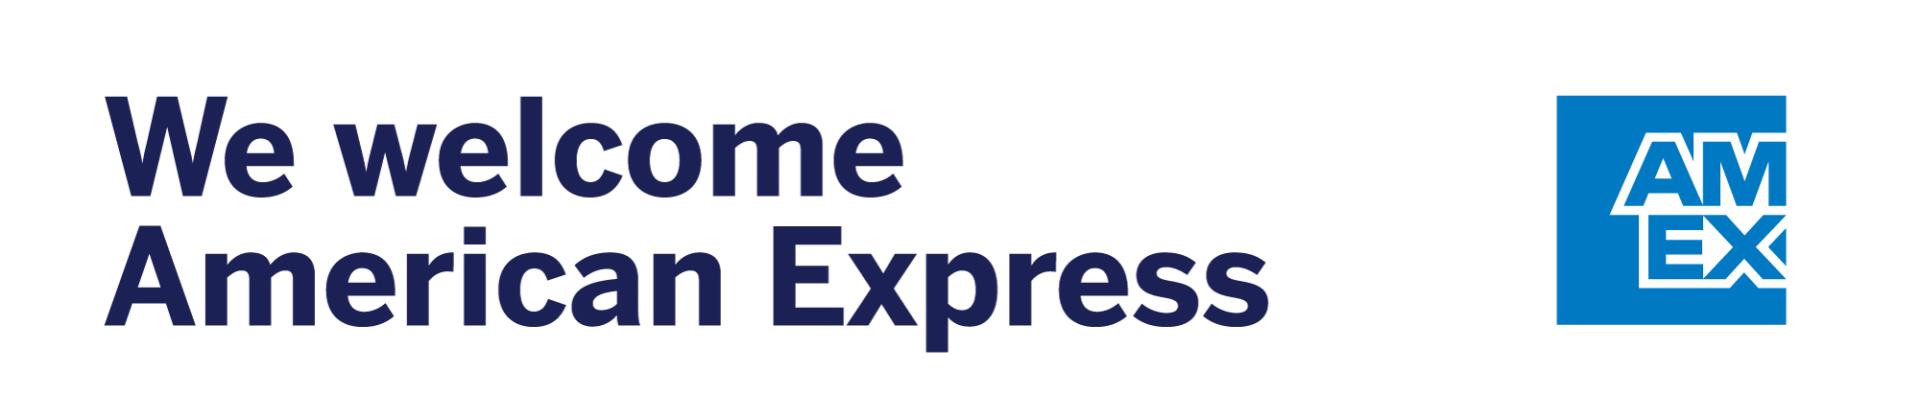 American Express Welcome